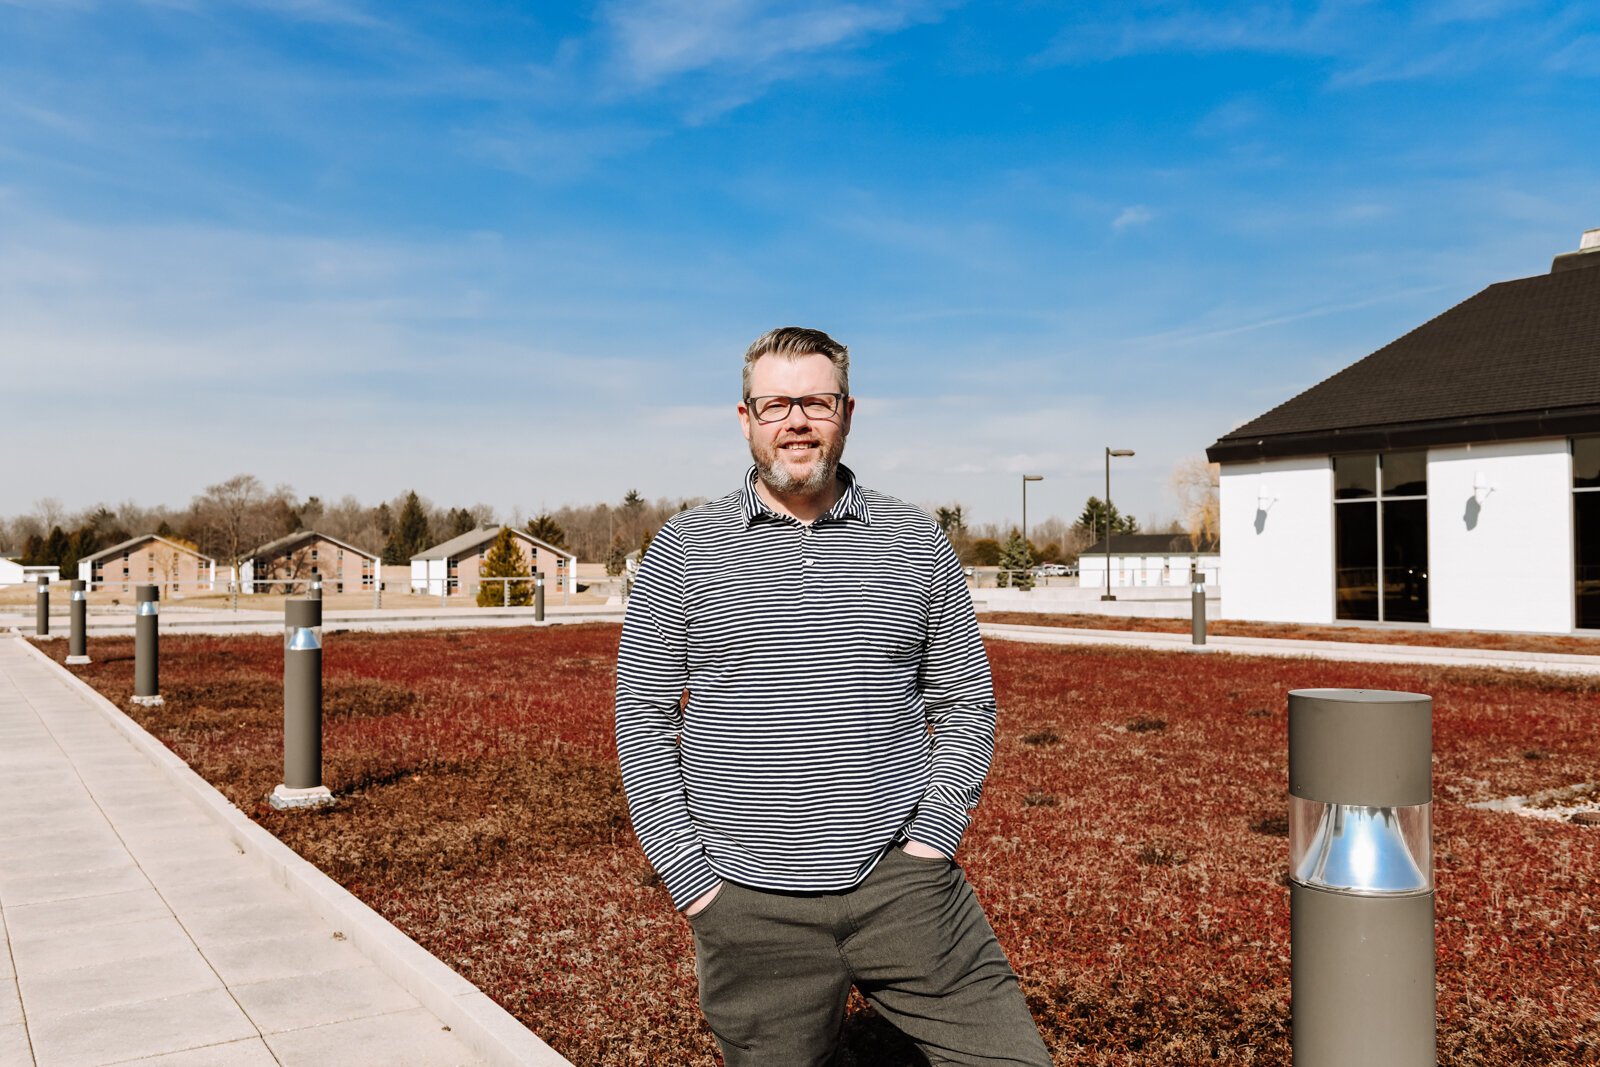 Deputy Director of Planning and Development at Fort Wayne Parks and Recreation Alec Johnson stands atop the green "living" roof at Concordia Theological Seminary (CTSFW) at 6600 N. Clinton St.